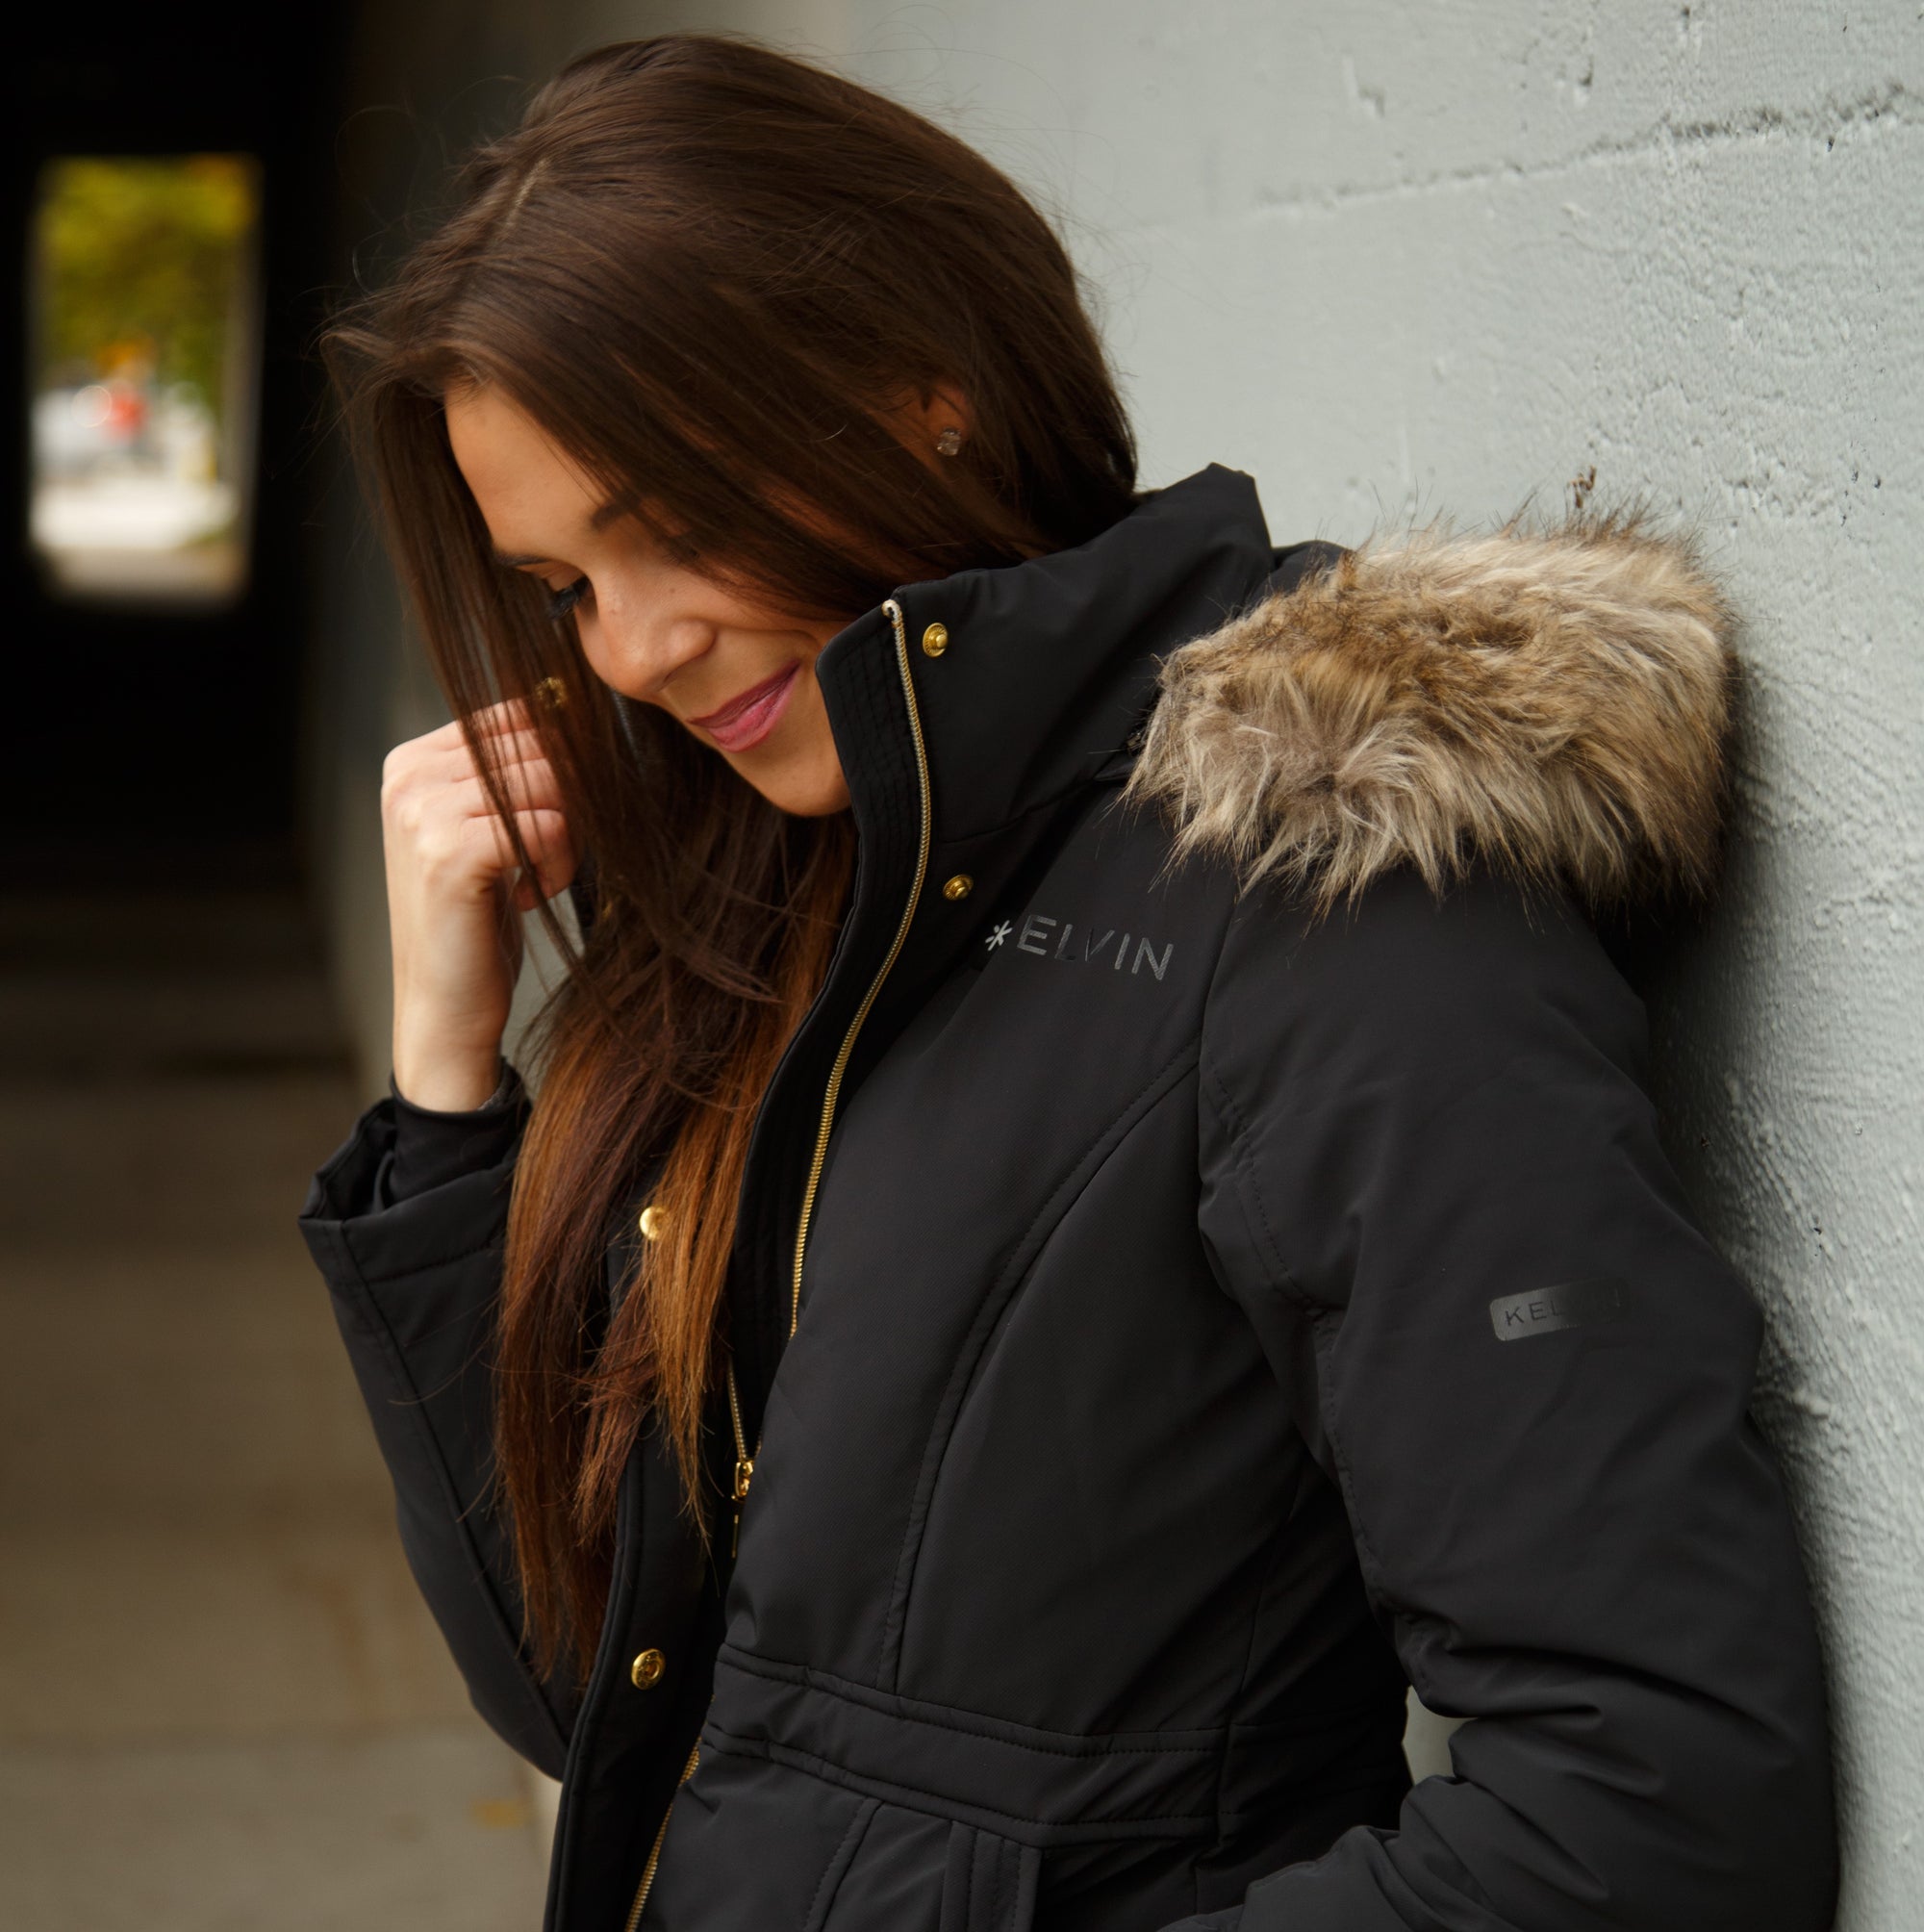 Heated Parka for Women